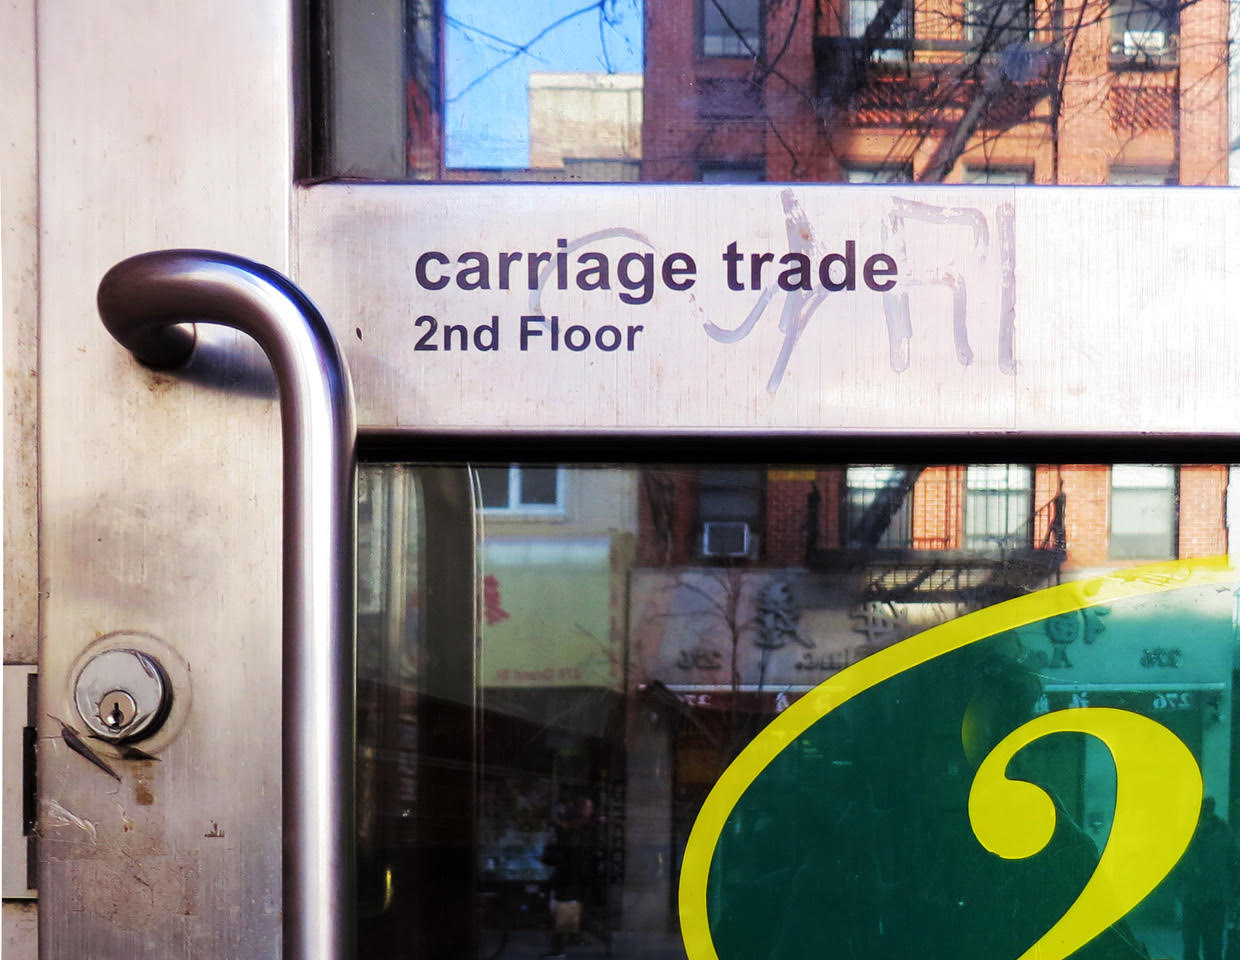 Photo of the Carriage Trade Gallery's entrance